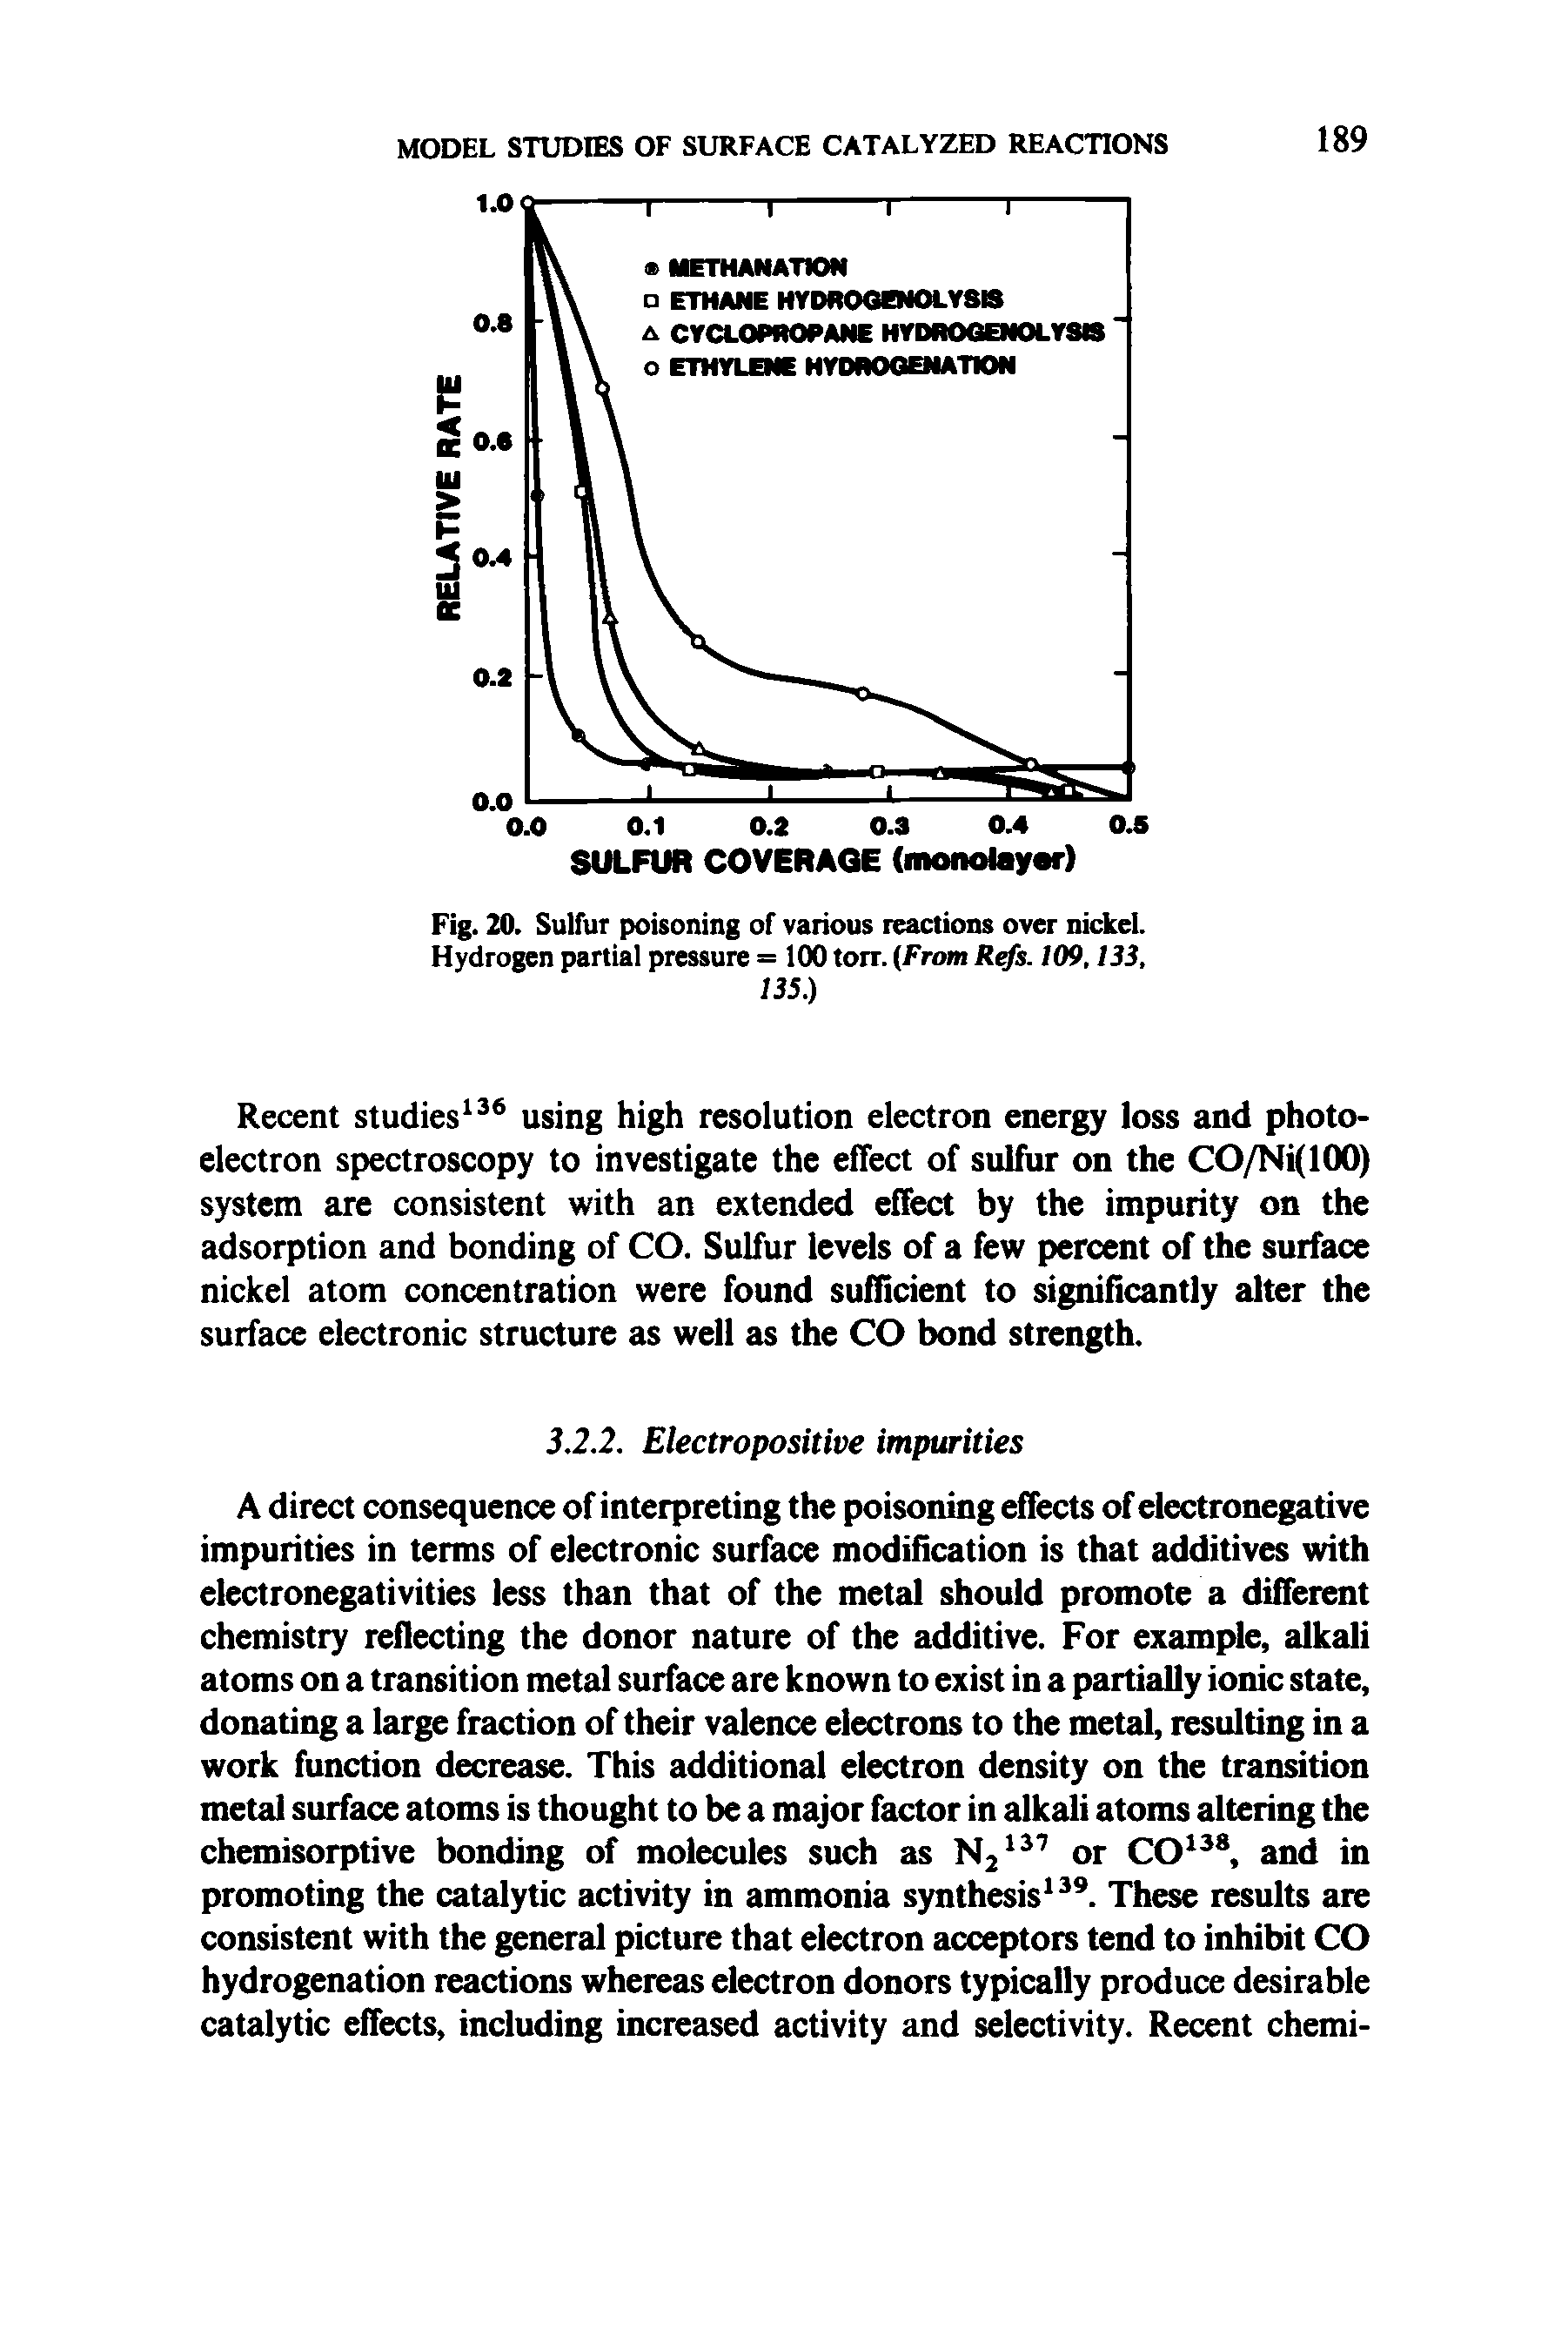 Fig. 20. Sulfur poisoning of various reactions over nickel. Hydrogen partial pressure = 100 toix. From R s. 109,133, 135.)...